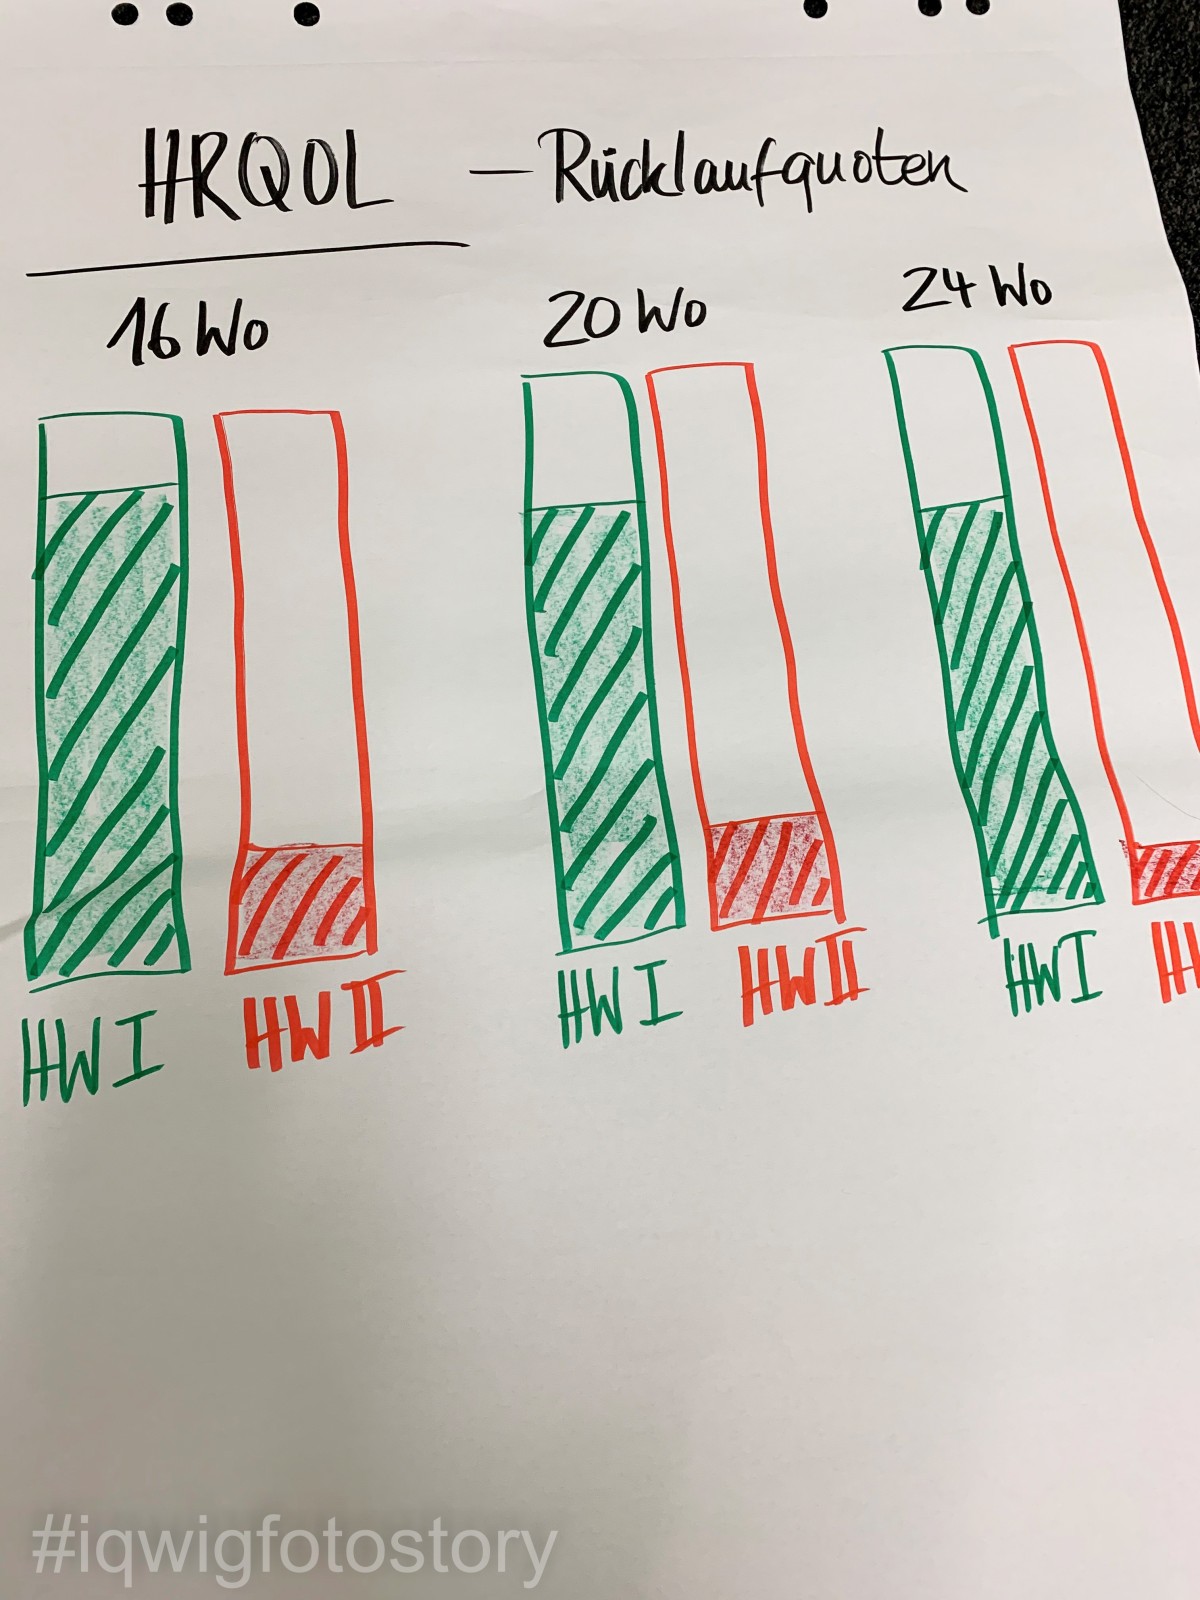 Flipchart sheet with six green and red bar graphs showing that the response rates to the quality-of-life surveys in one of the two studies are very low.